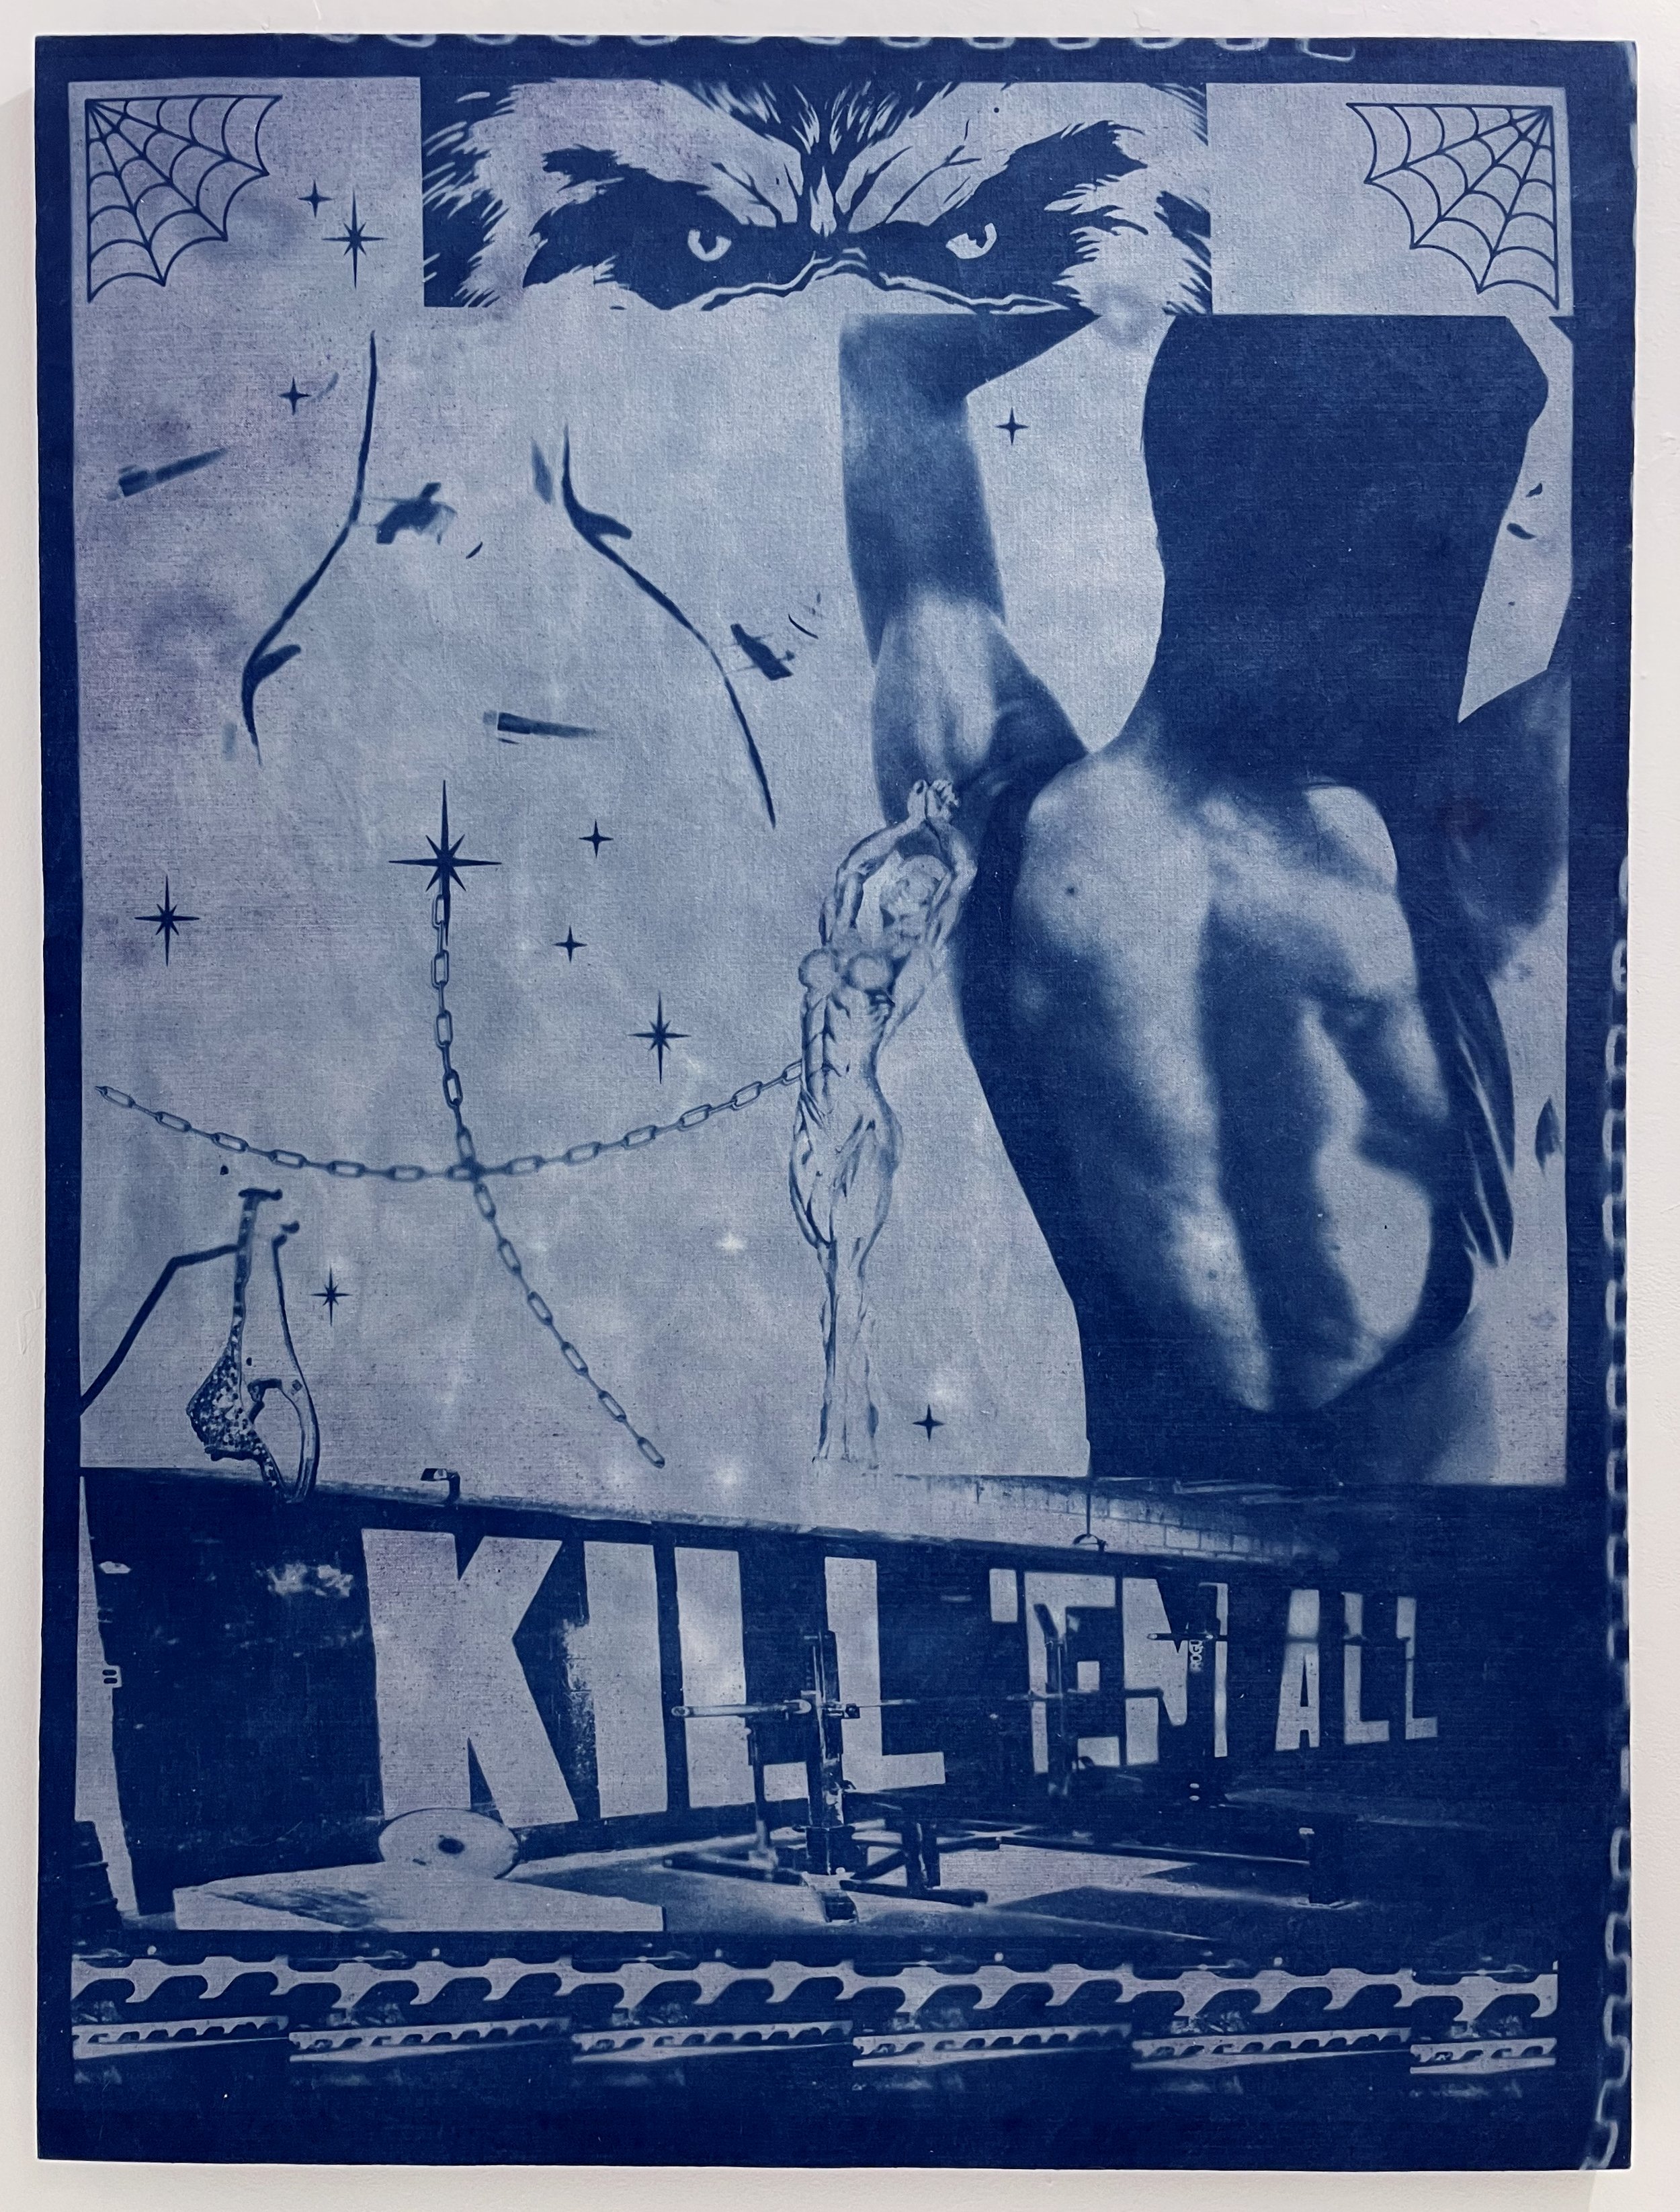  cyanotype on raw stretched canvas, 36” x 48” 